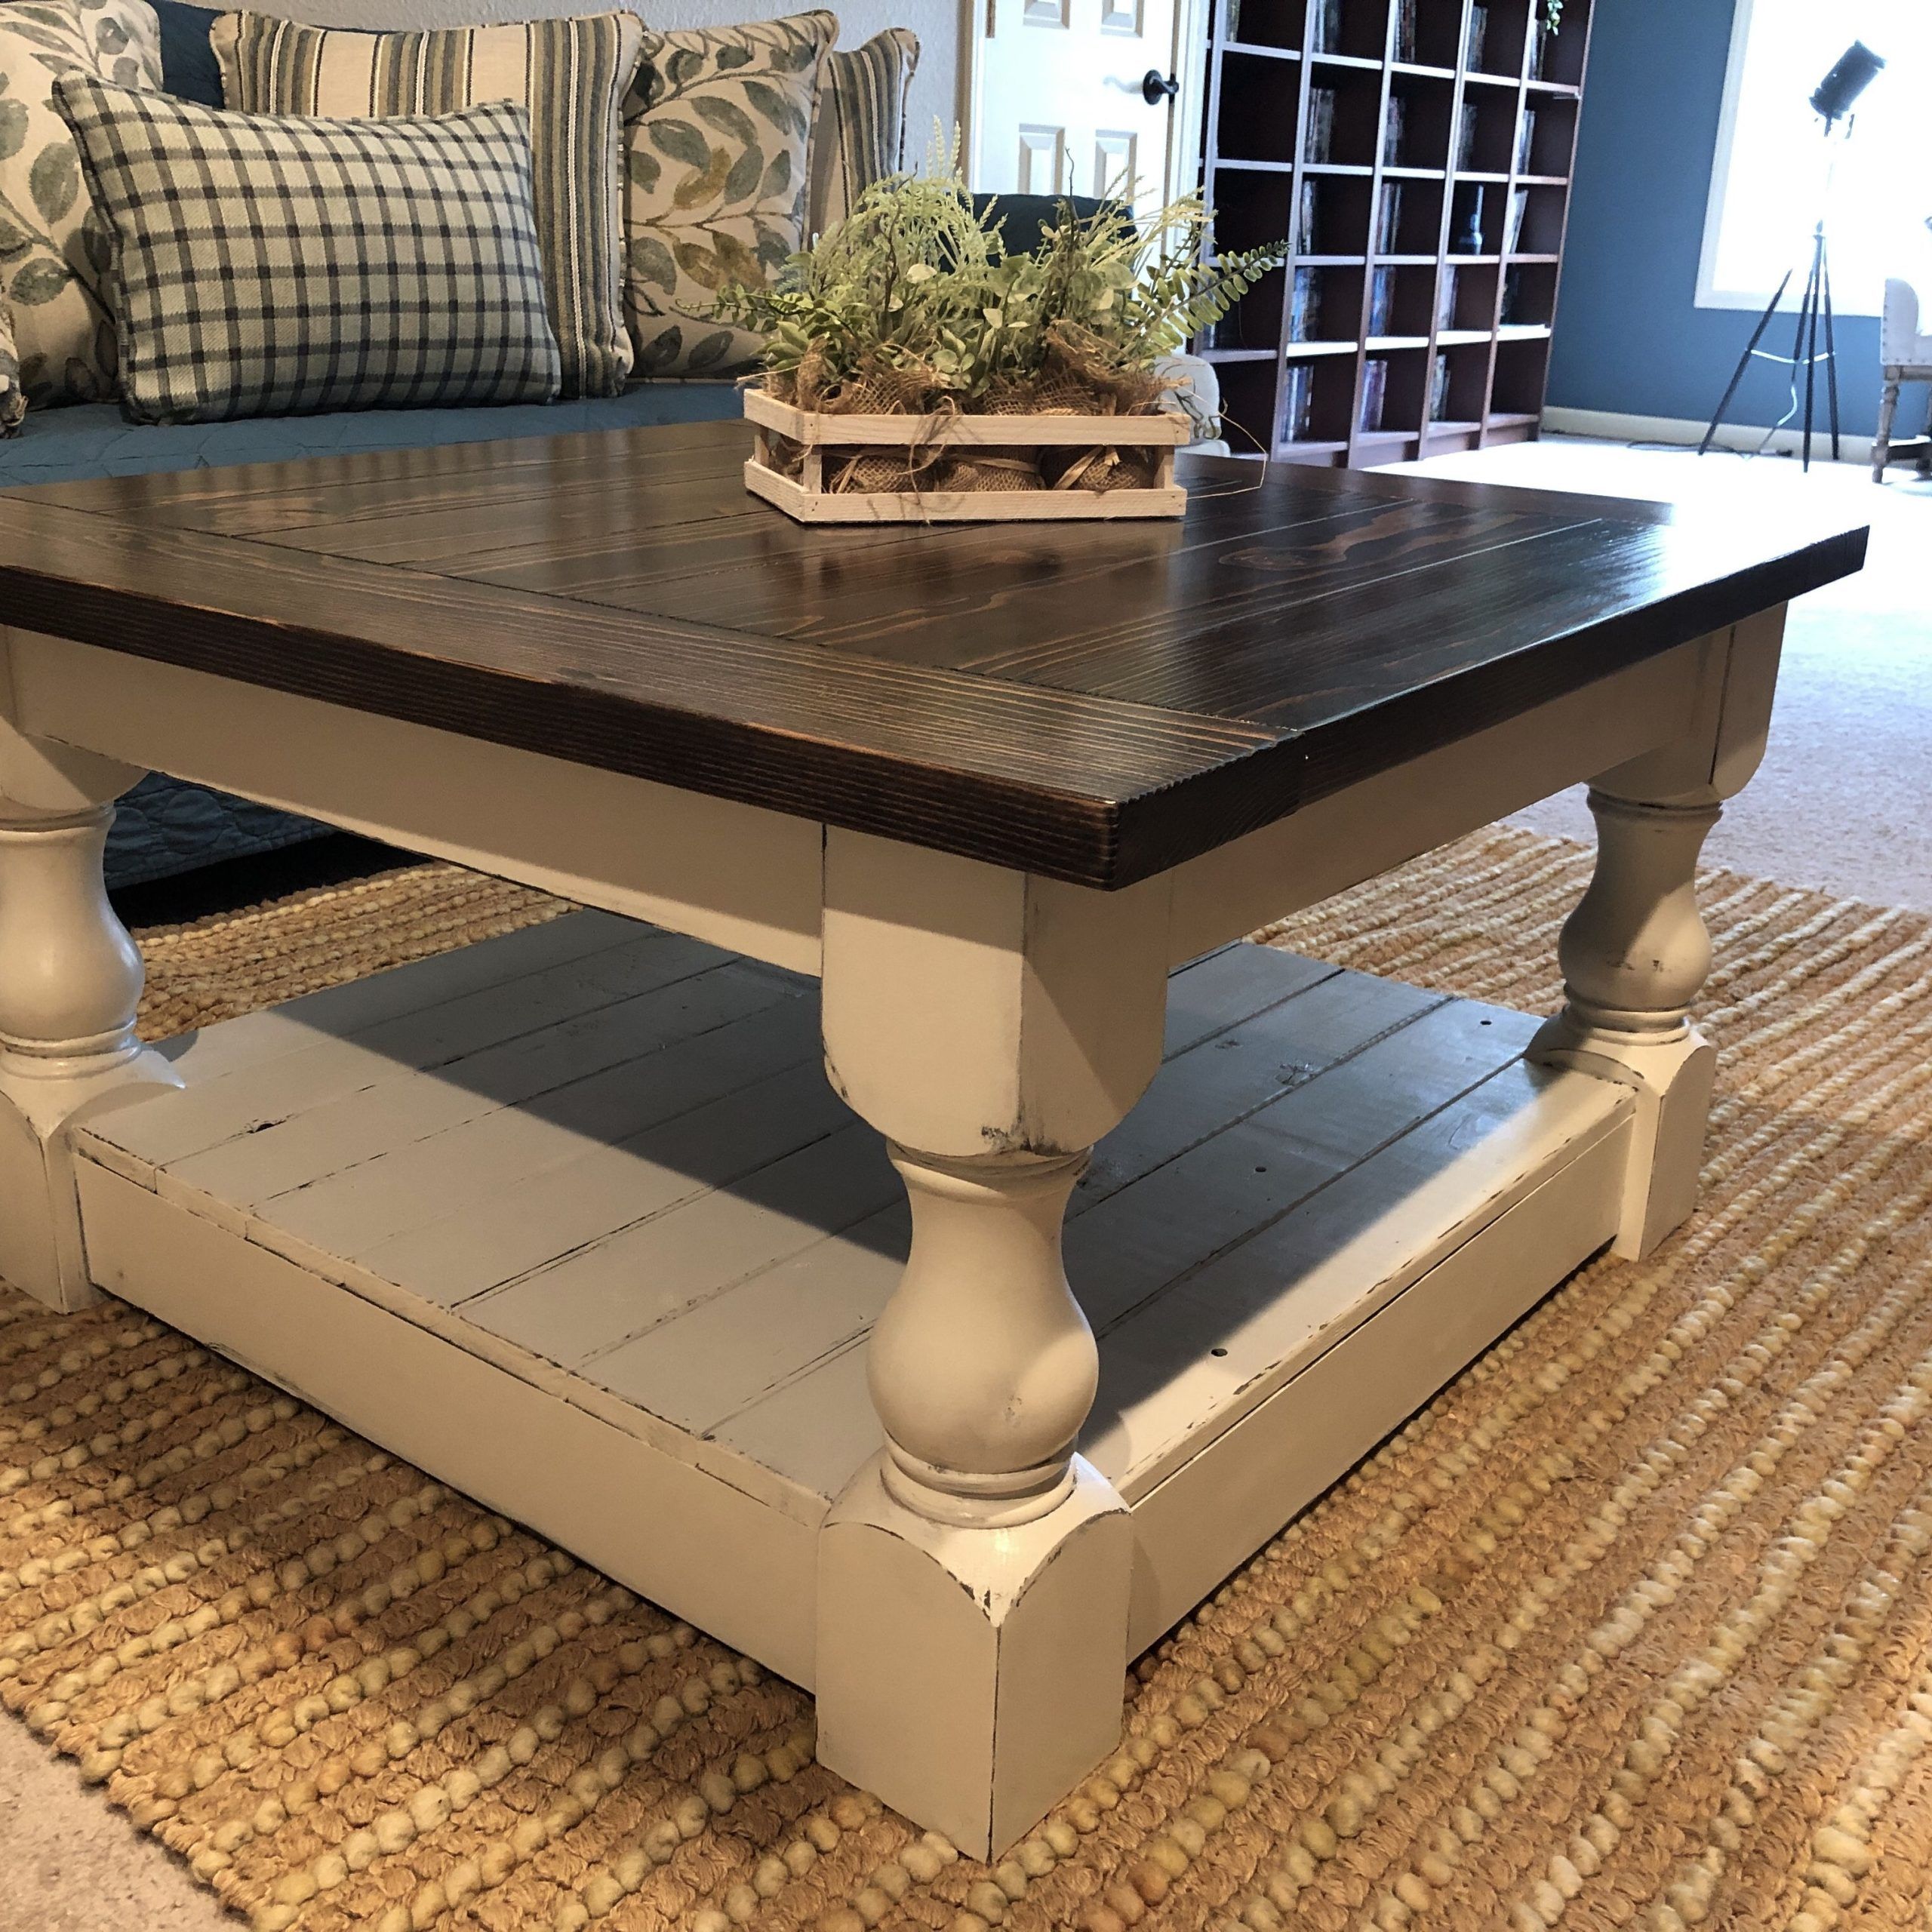 A Perfect Addition To Your Home: The Farmhouse Rustic Coffee Table Pertaining To Living Room Farmhouse Coffee Tables (View 8 of 20)